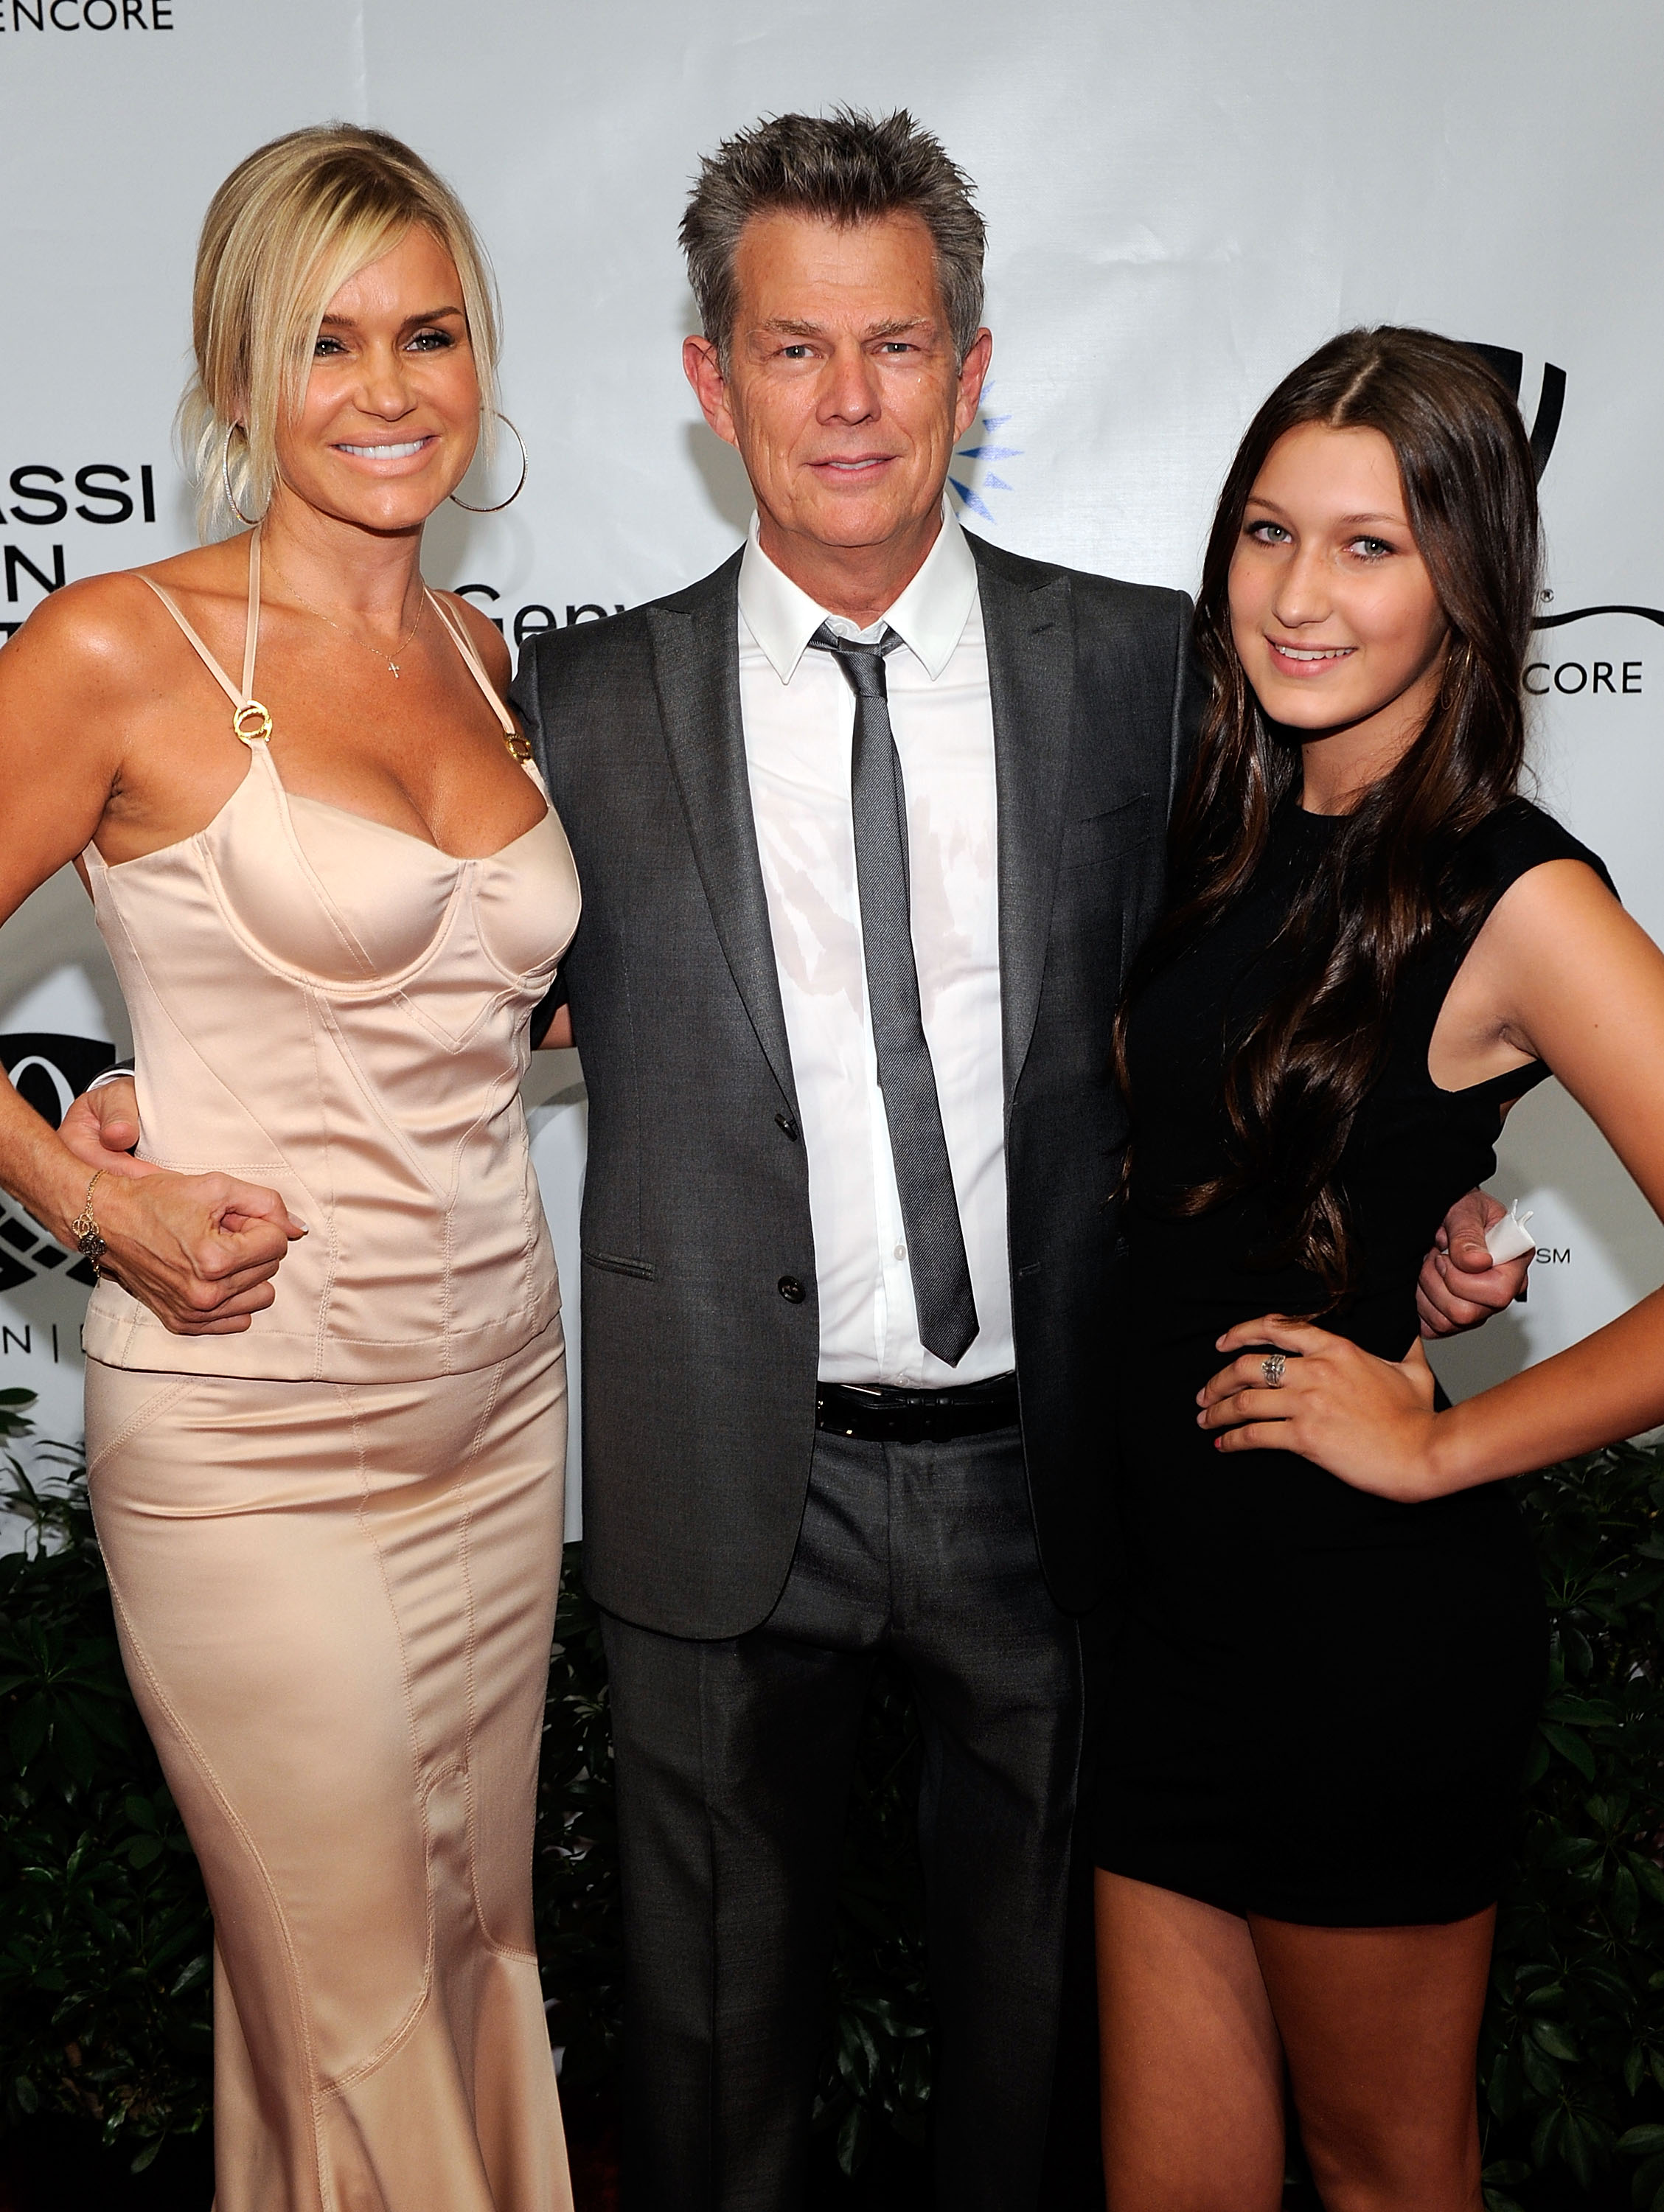 Yolanda Hadid, David Foster and Bella Hadid arrive at the Andre Agassi Foundation for Education's 15th Grand Slam for Children benefit concert at the Wynn Las Vegas October 9, 2010 in Las Vegas, Nevada. | Source: Getty Images